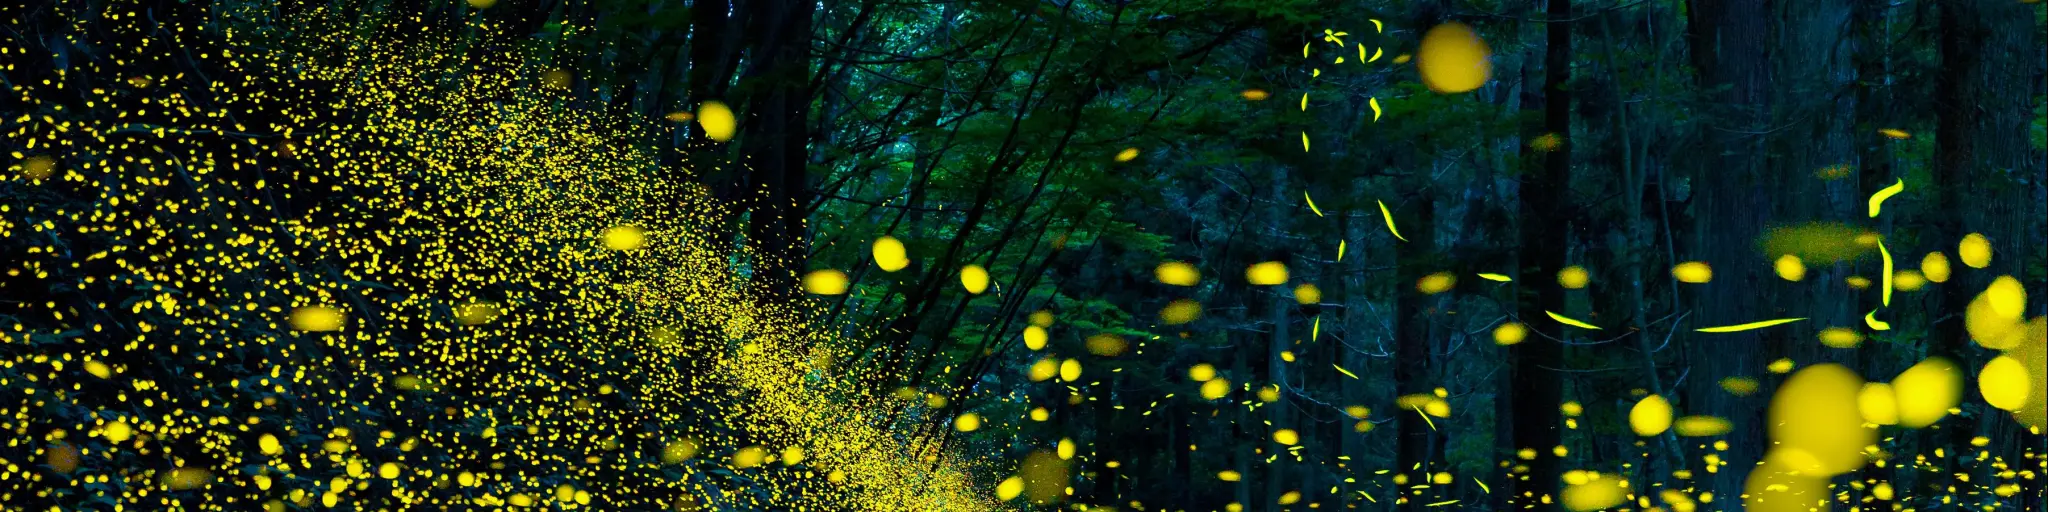 Fireflies flying simultaneously as the night falls in a dense forest